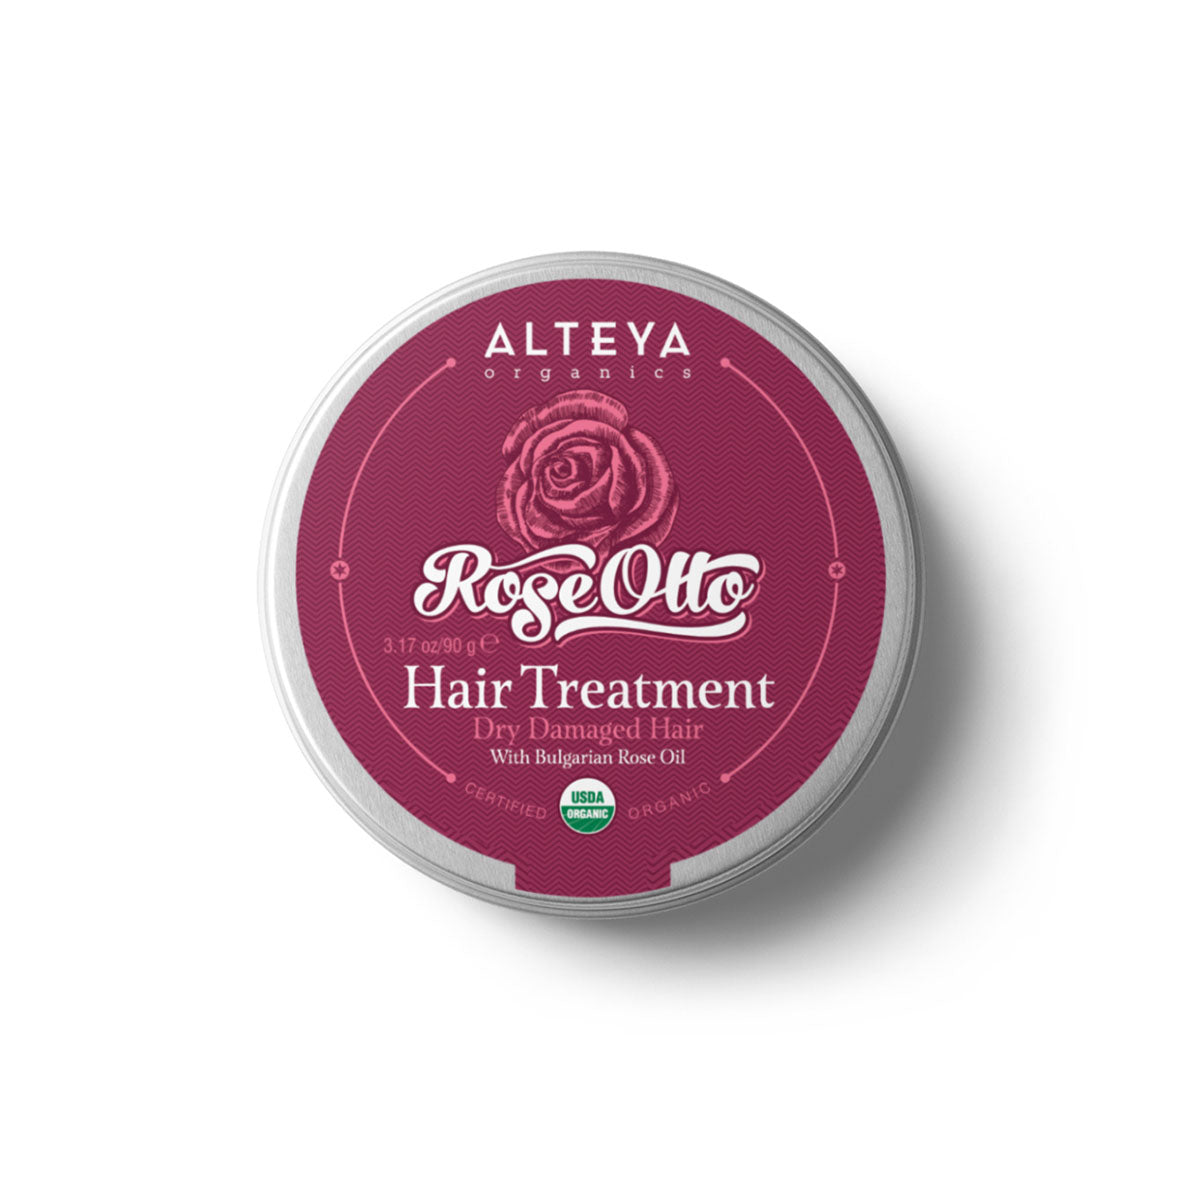 Certified Organic Rose Otto Hair Treatment that fortifies and revitalizes dry, brittle hair. It helps prevent hair breakage and split ends, improves texture, shine and body.